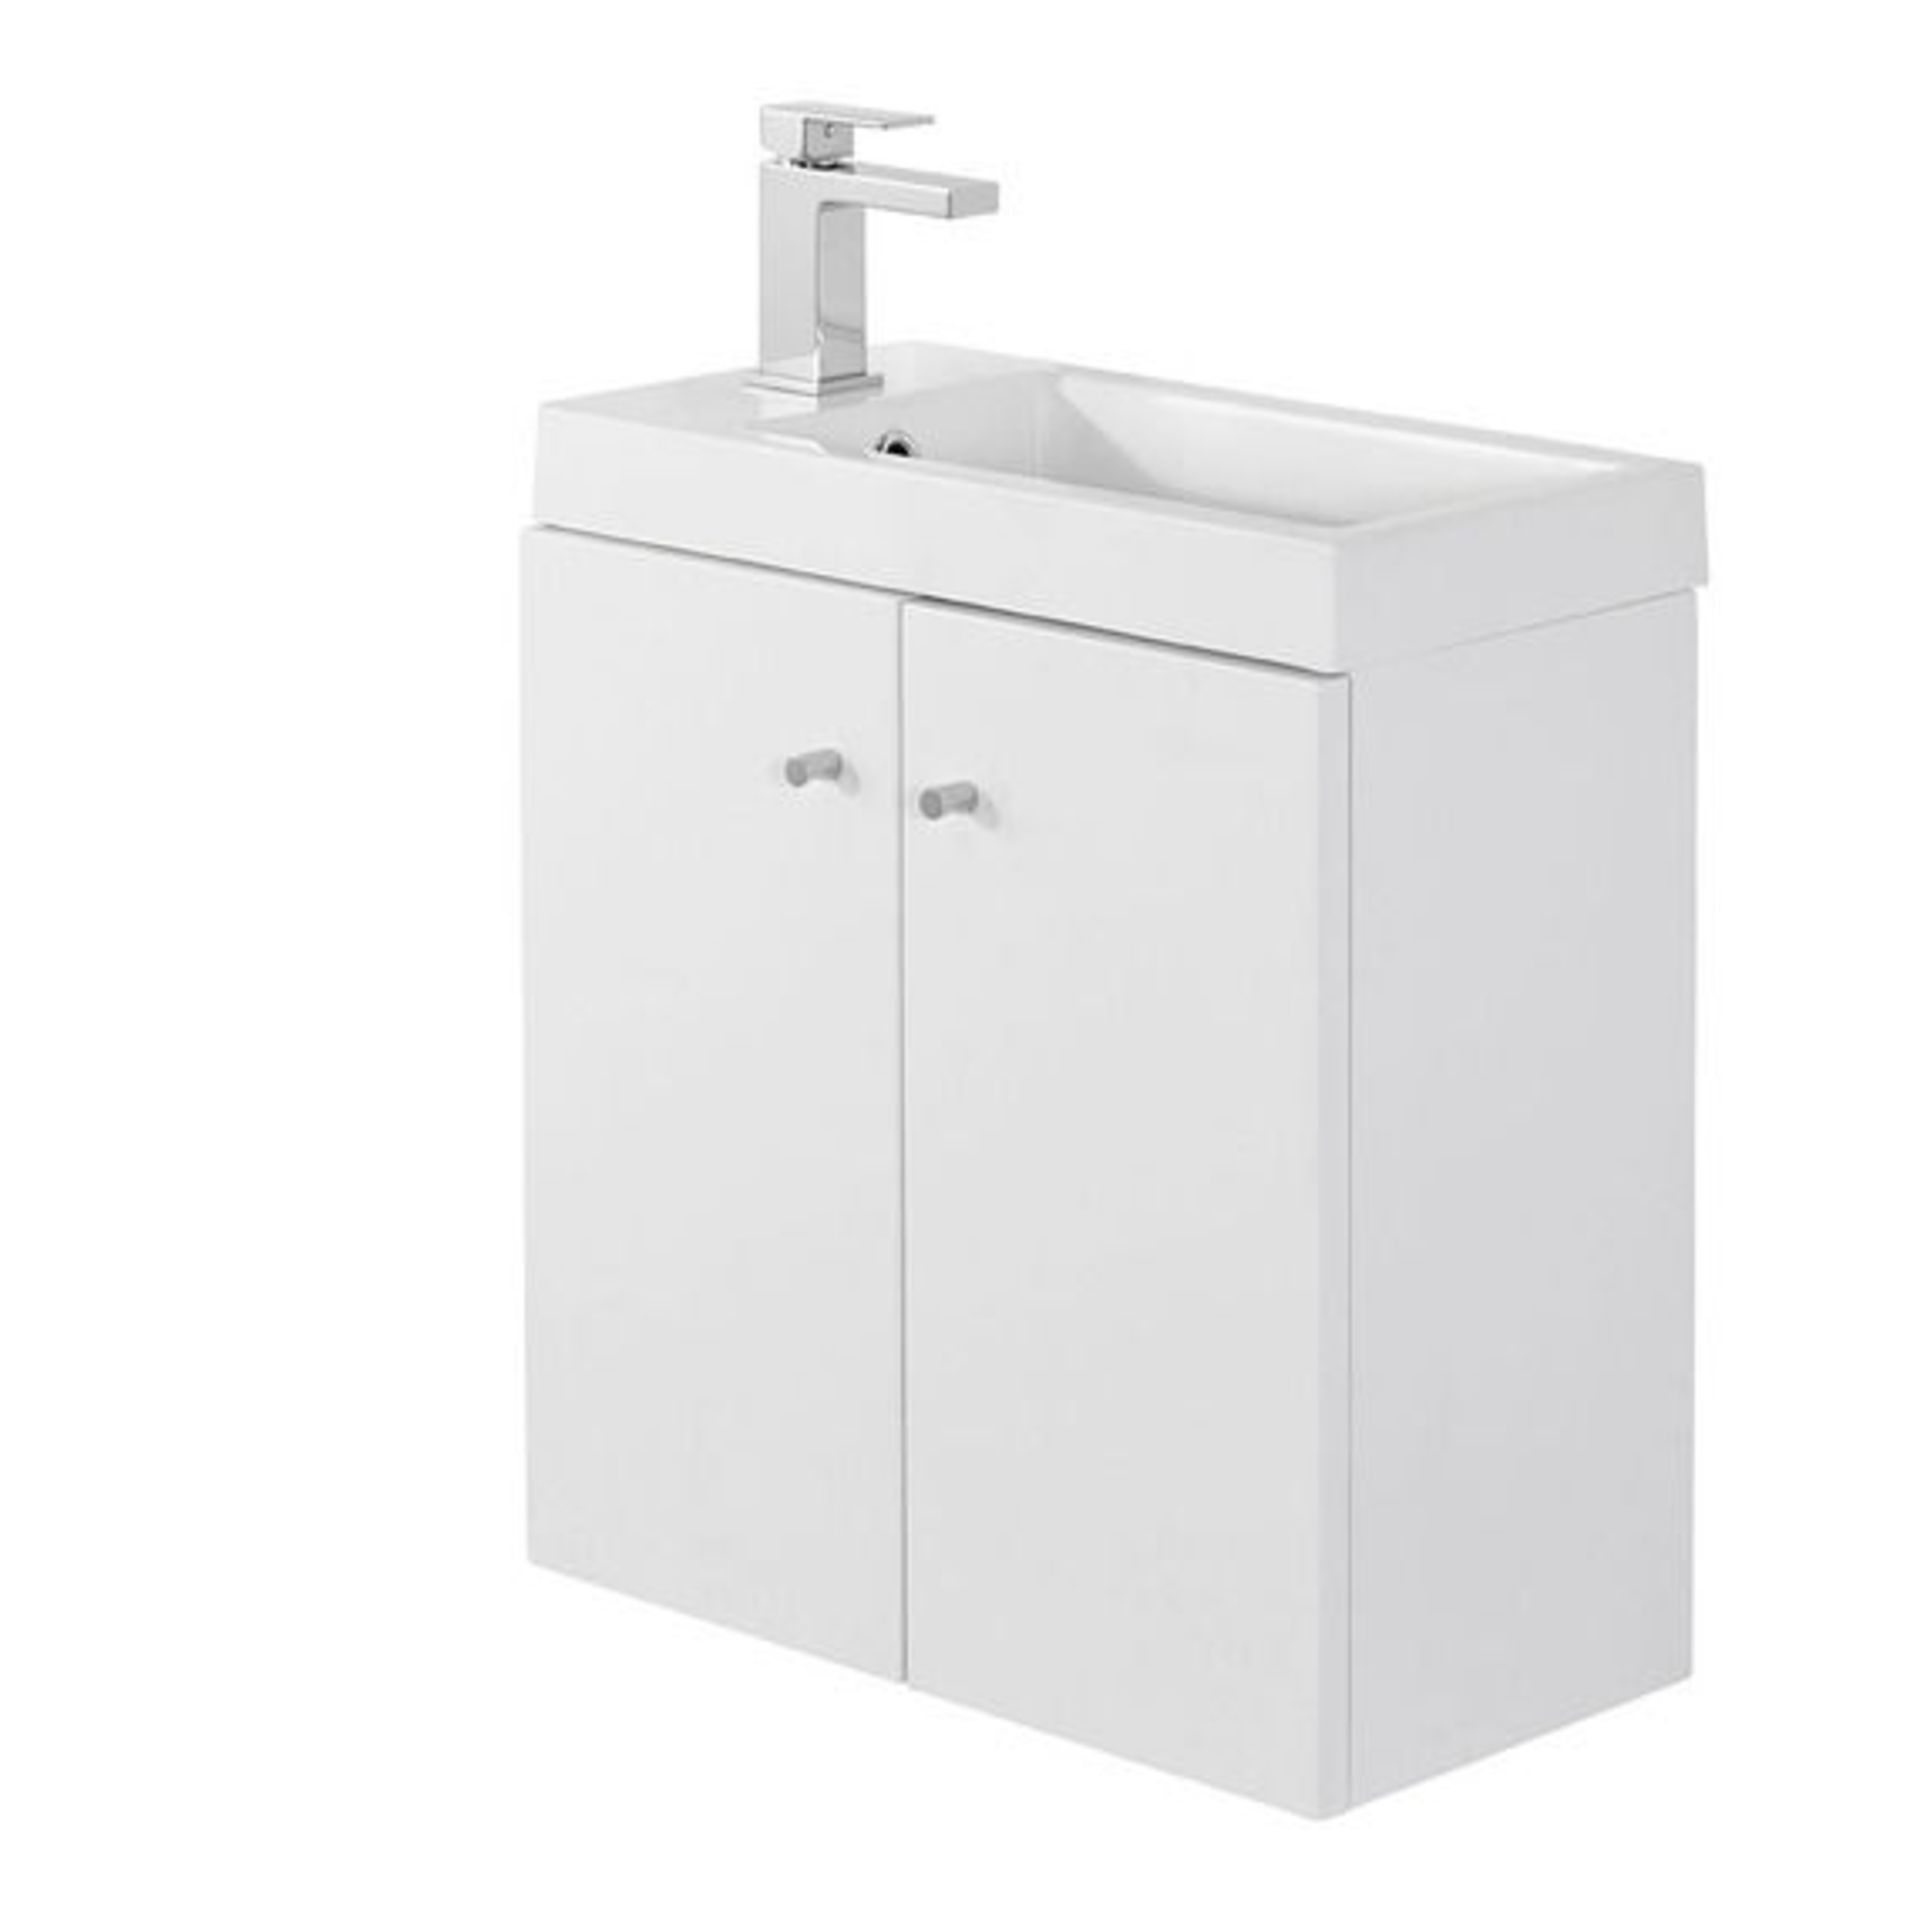 10 x Alpine Duo 495 Wall Hung Vanity Unit  - Gloss White - Brand New Boxed Stock - Dimensions: W49.5 - Image 4 of 5